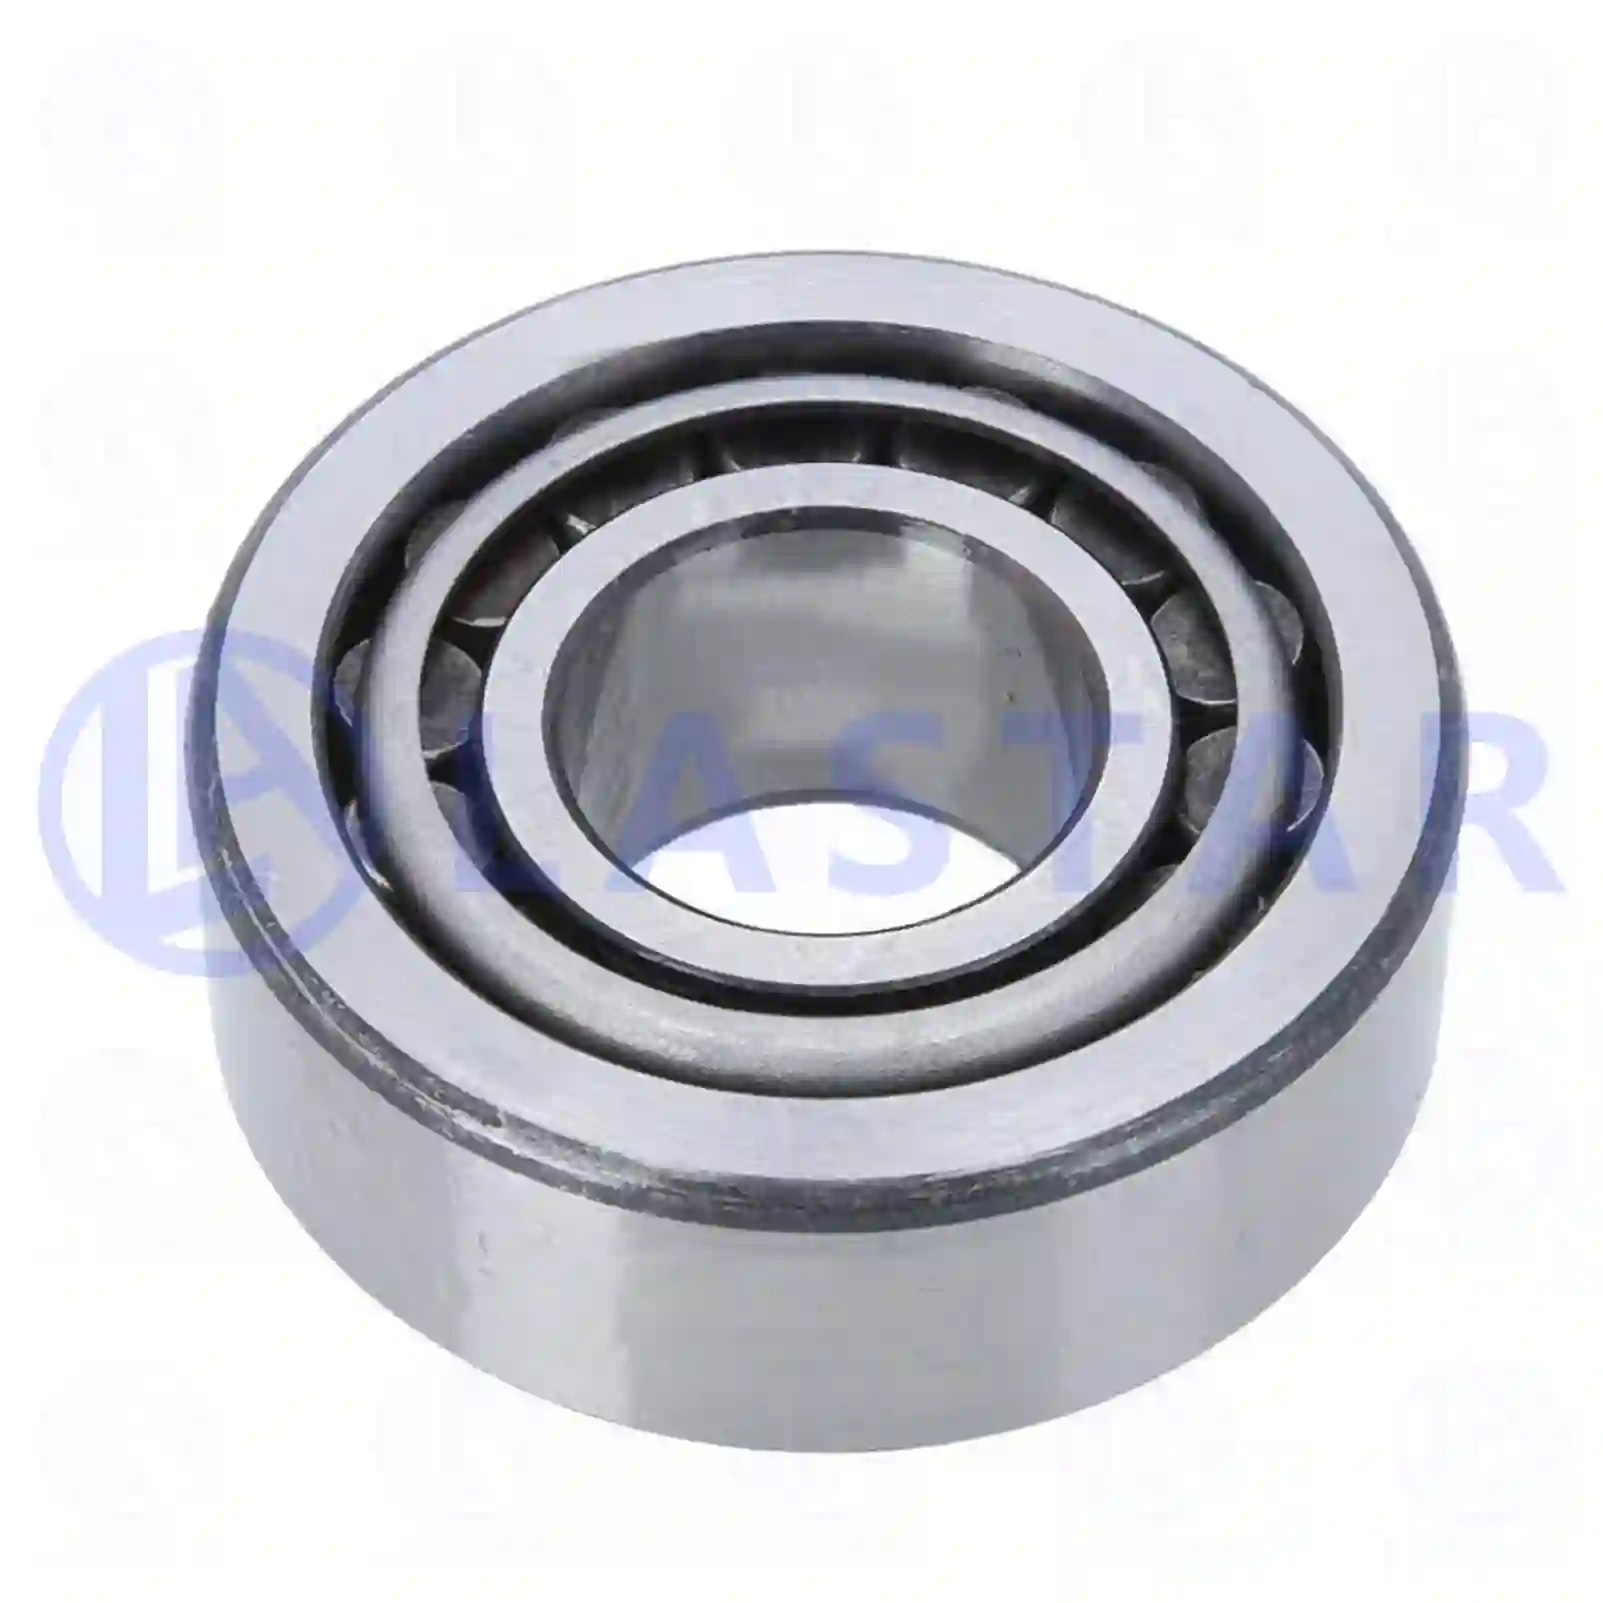 Tapered roller bearing, 77725208, 290063314, 0264060300, 26800560, 91124-PH8-008, 06324902800, 06324990112, 34934200002, 88934206010, A0772320600, A0773230600, 0009819505, 000720032306, 0019818305, 0019818705, 0019819505, 0069815905, 3129810205, 3129810501, 09022-0015P, 38120-13200, 38120-13201, 38120-13210, 7058598, 0023432306, 0773230680, 14614, 0009815318, 806330010, 11073, 66001044, 6601044, ZG03010-0008 ||  77725208 Lastar Spare Part | Truck Spare Parts, Auotomotive Spare Parts Tapered roller bearing, 77725208, 290063314, 0264060300, 26800560, 91124-PH8-008, 06324902800, 06324990112, 34934200002, 88934206010, A0772320600, A0773230600, 0009819505, 000720032306, 0019818305, 0019818705, 0019819505, 0069815905, 3129810205, 3129810501, 09022-0015P, 38120-13200, 38120-13201, 38120-13210, 7058598, 0023432306, 0773230680, 14614, 0009815318, 806330010, 11073, 66001044, 6601044, ZG03010-0008 ||  77725208 Lastar Spare Part | Truck Spare Parts, Auotomotive Spare Parts